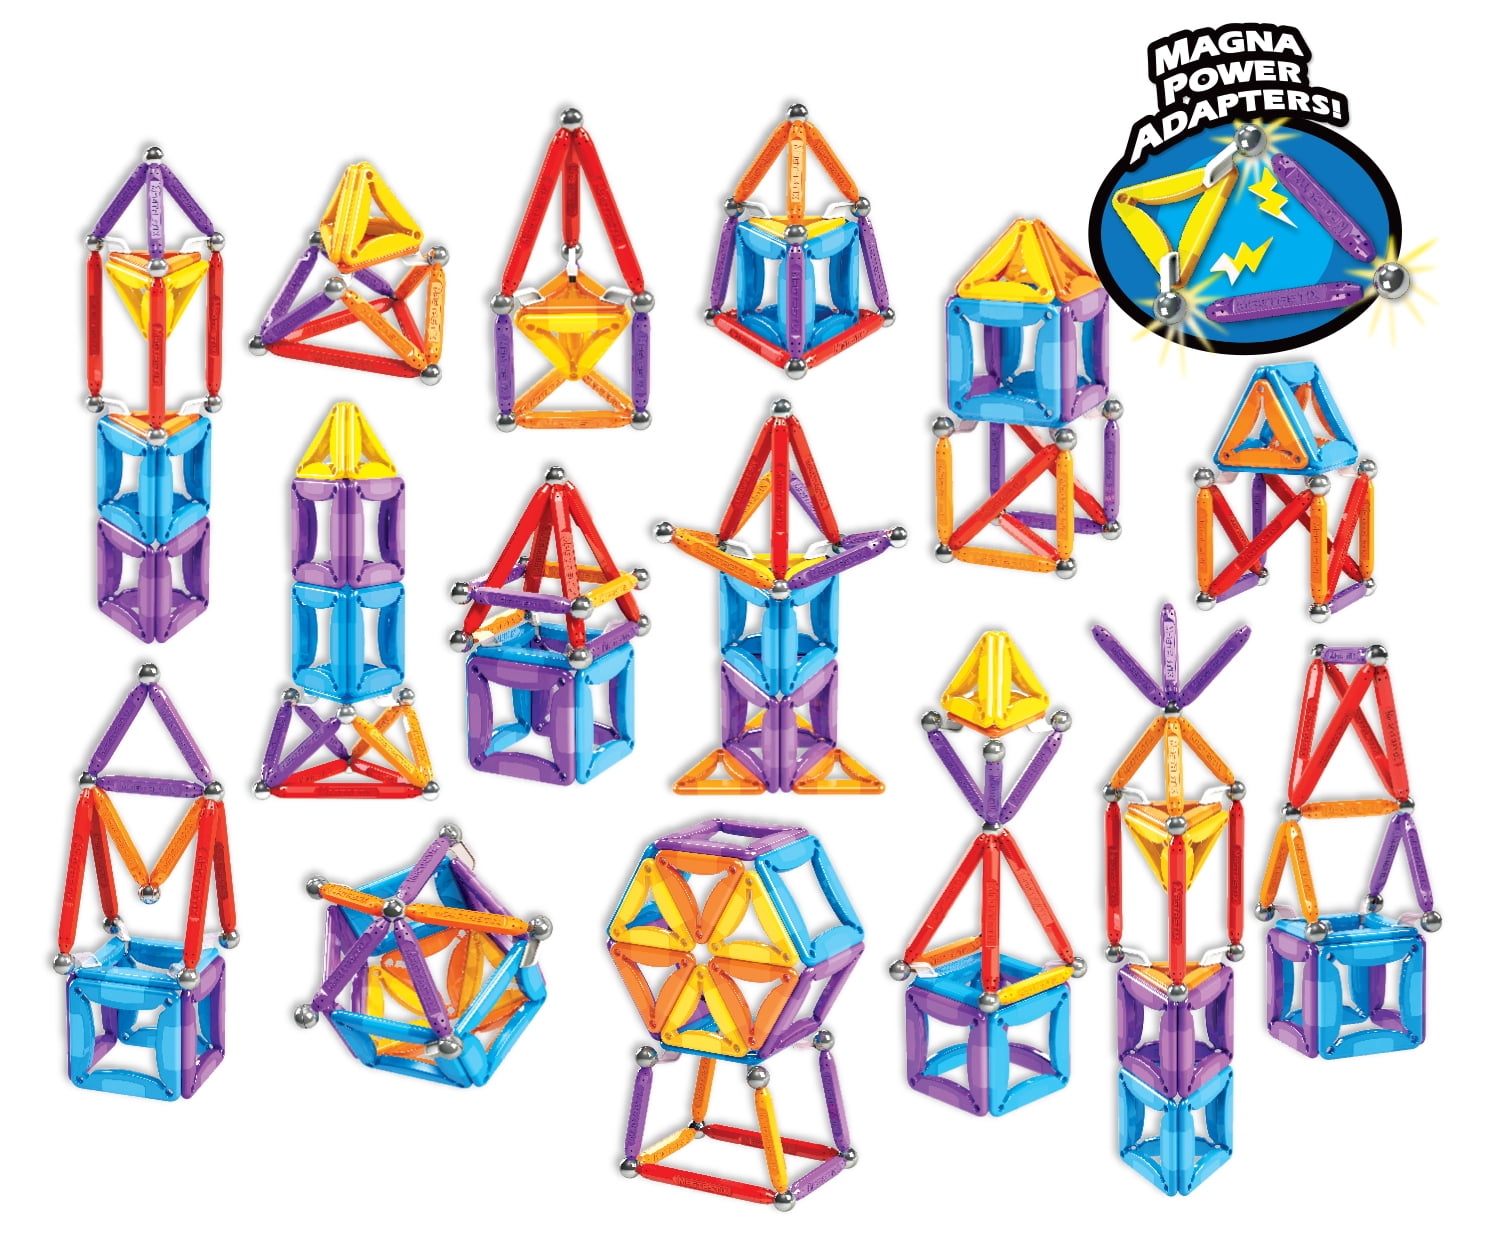 Cra-Z-Art Magtastix Extreme Combo 50 Piece Activity Set, Fun STEM Toy for  Ages 6 and up - Walmart.com